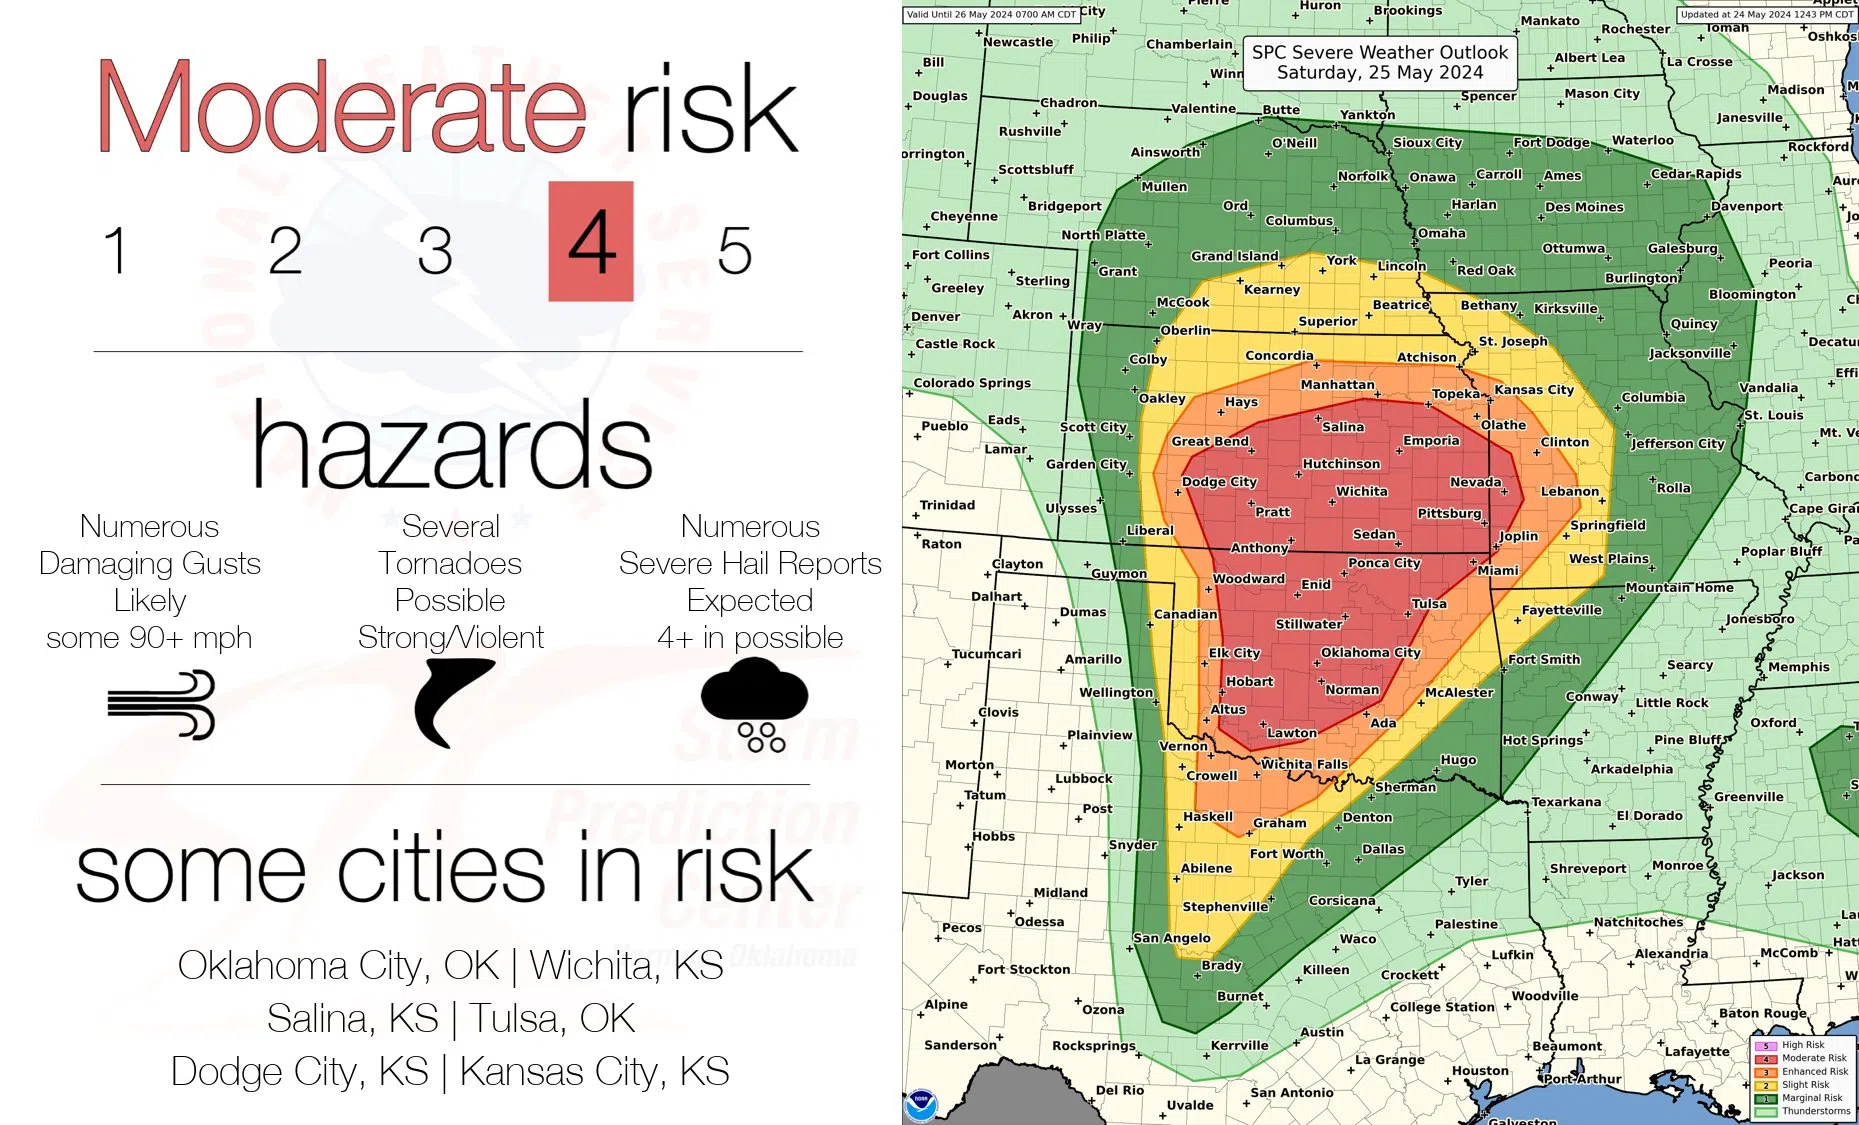 WEATHER: Saturday severe risk upgraded to moderate for all hazards